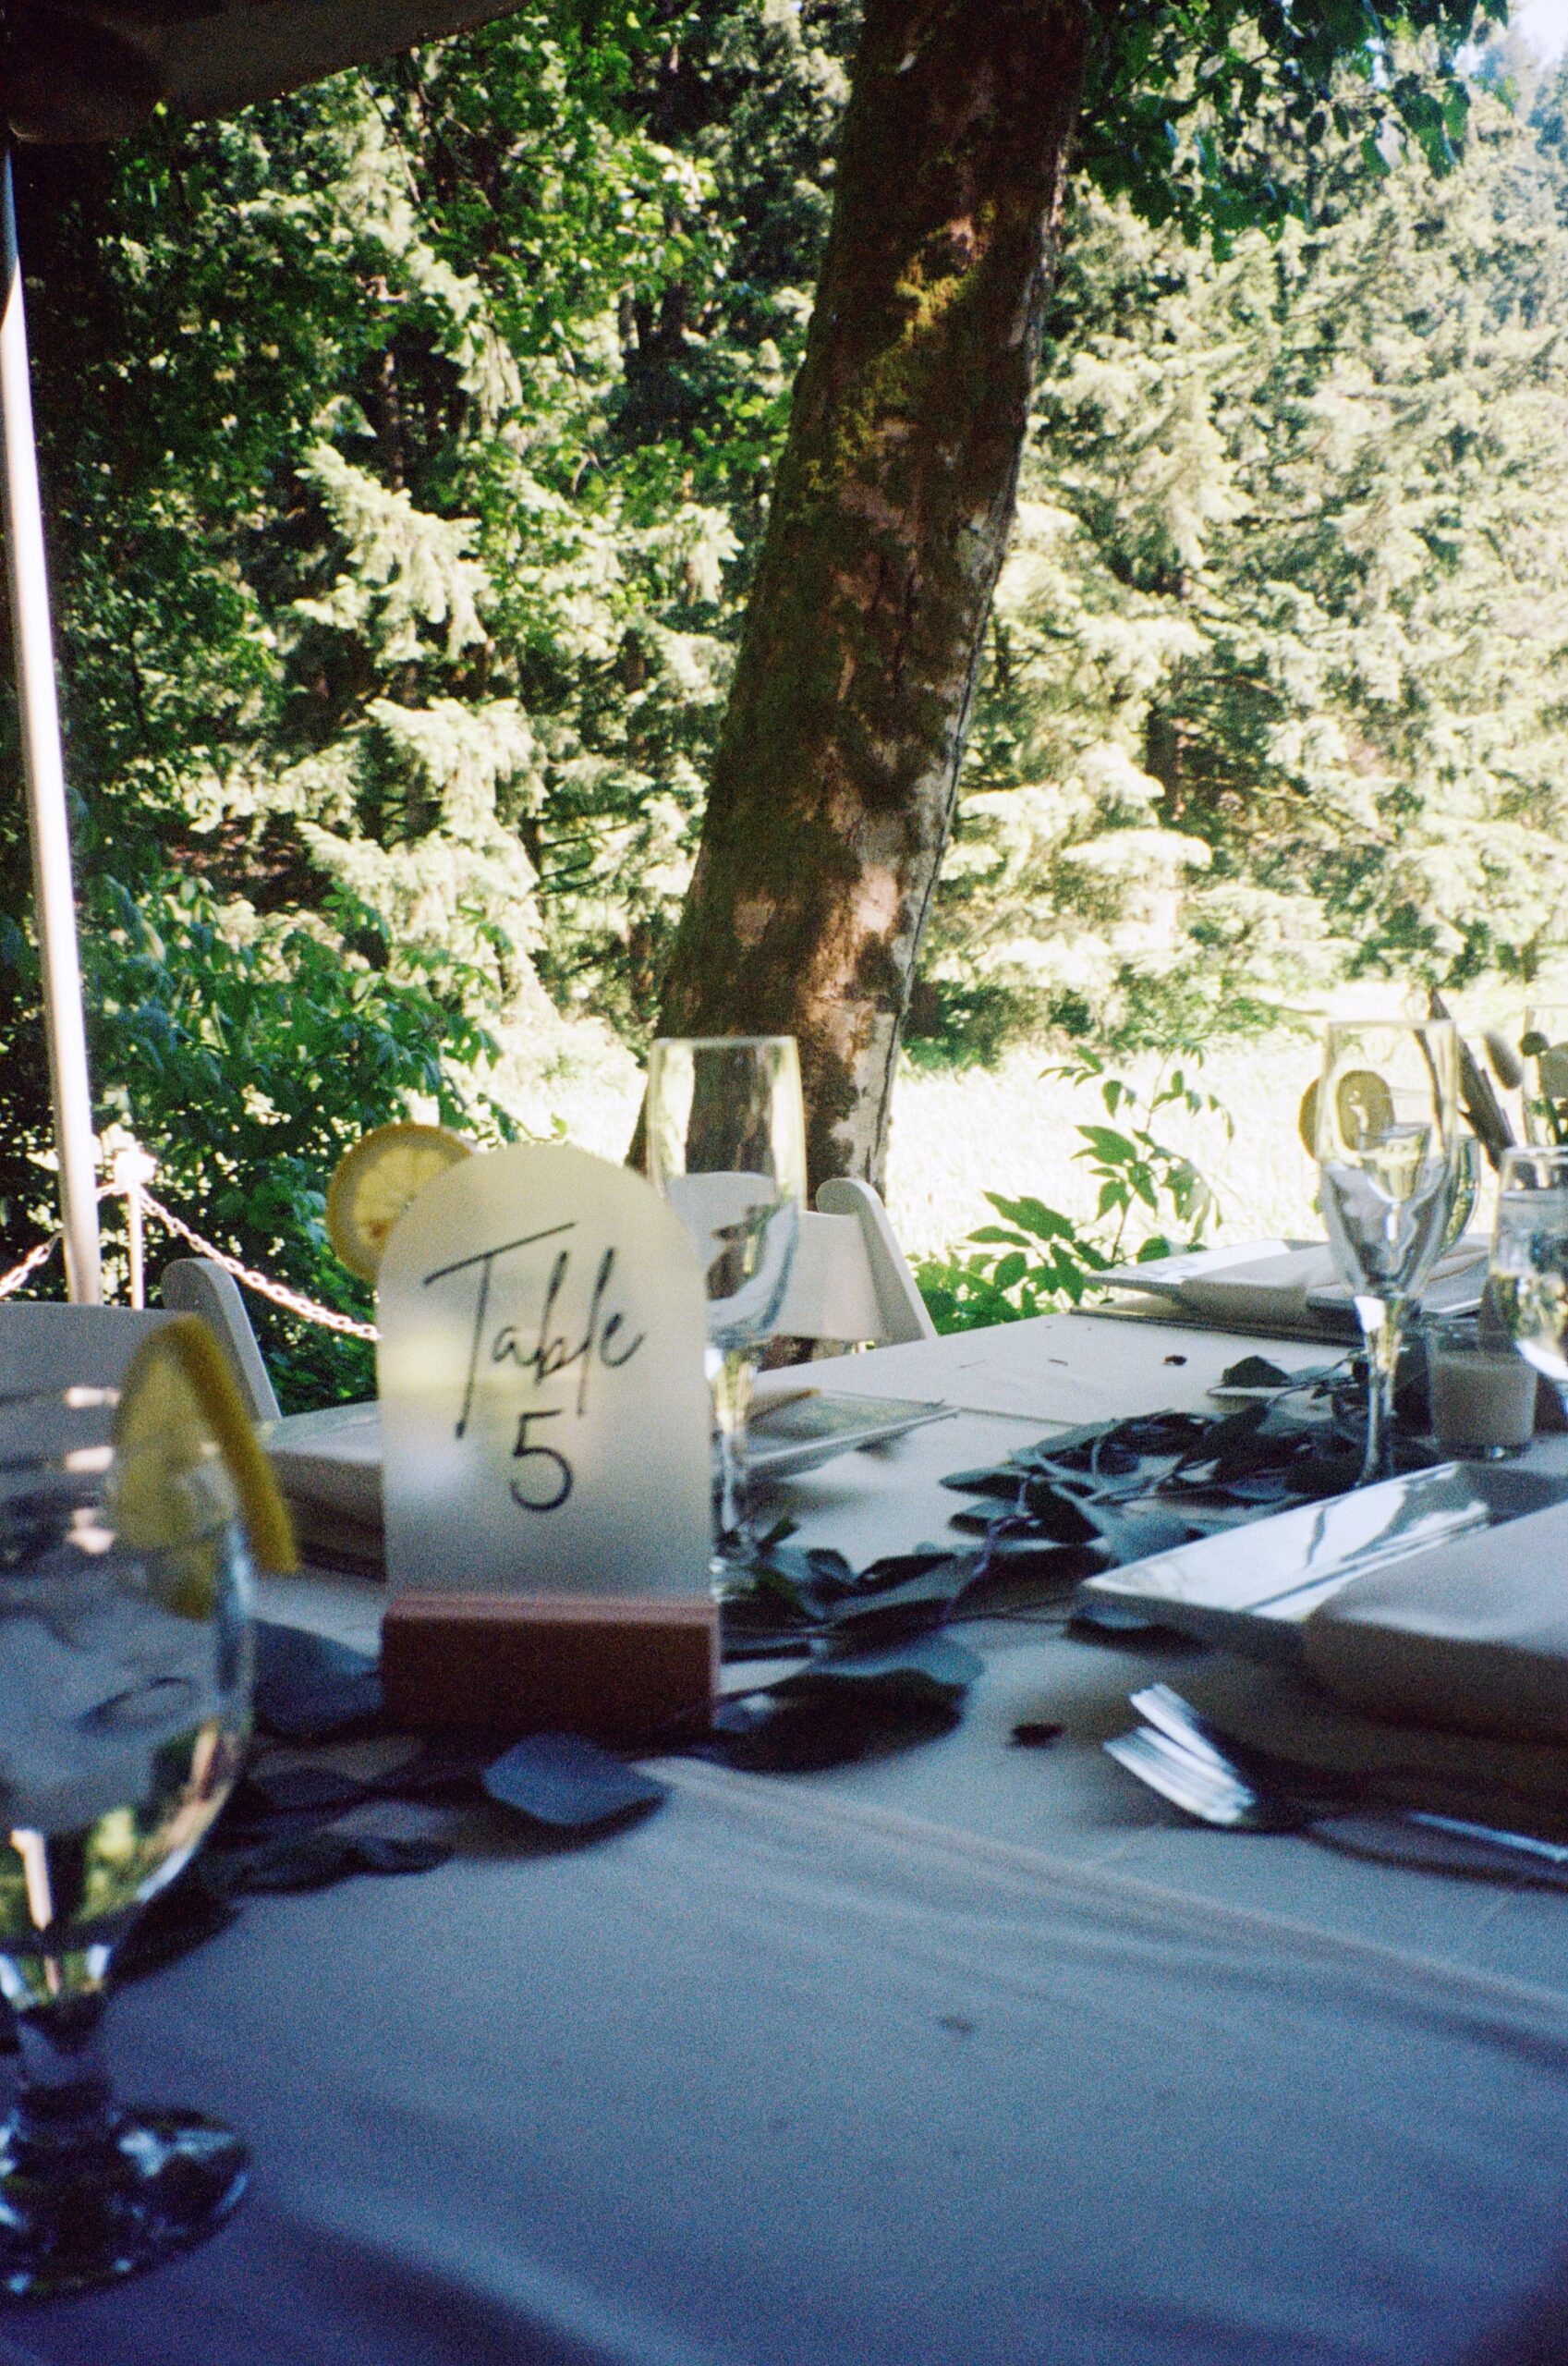 wedding table set up with place settings for wedding tables. Film photography for weddings and engagements